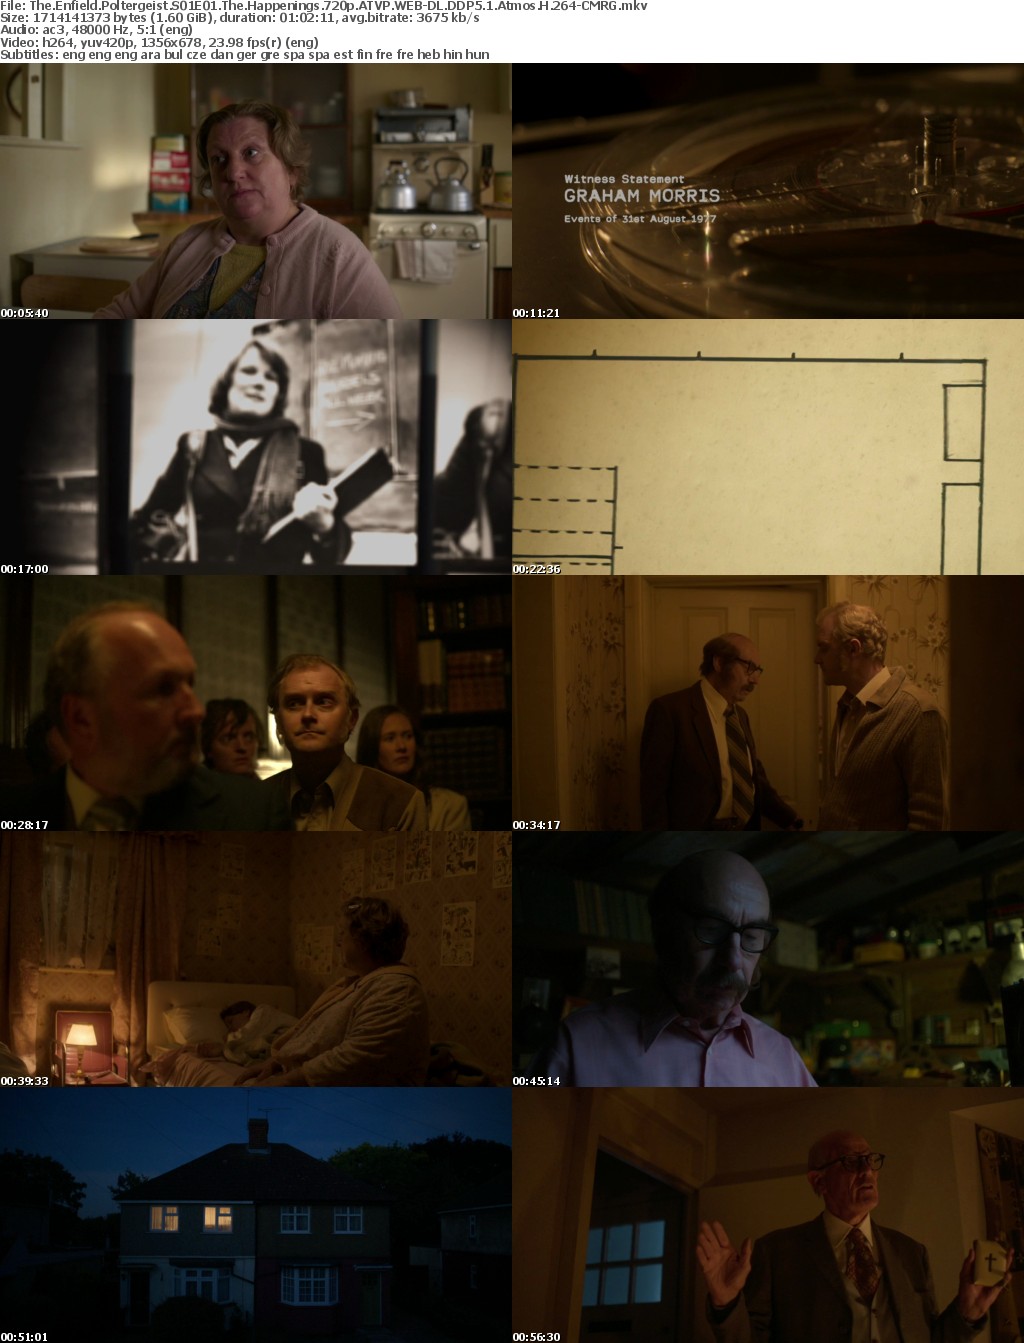 The Enfield Poltergeist S01E01 The Happenings 720p ATVP WEB-DL DDP5 1 Atmos H 264-CMRG